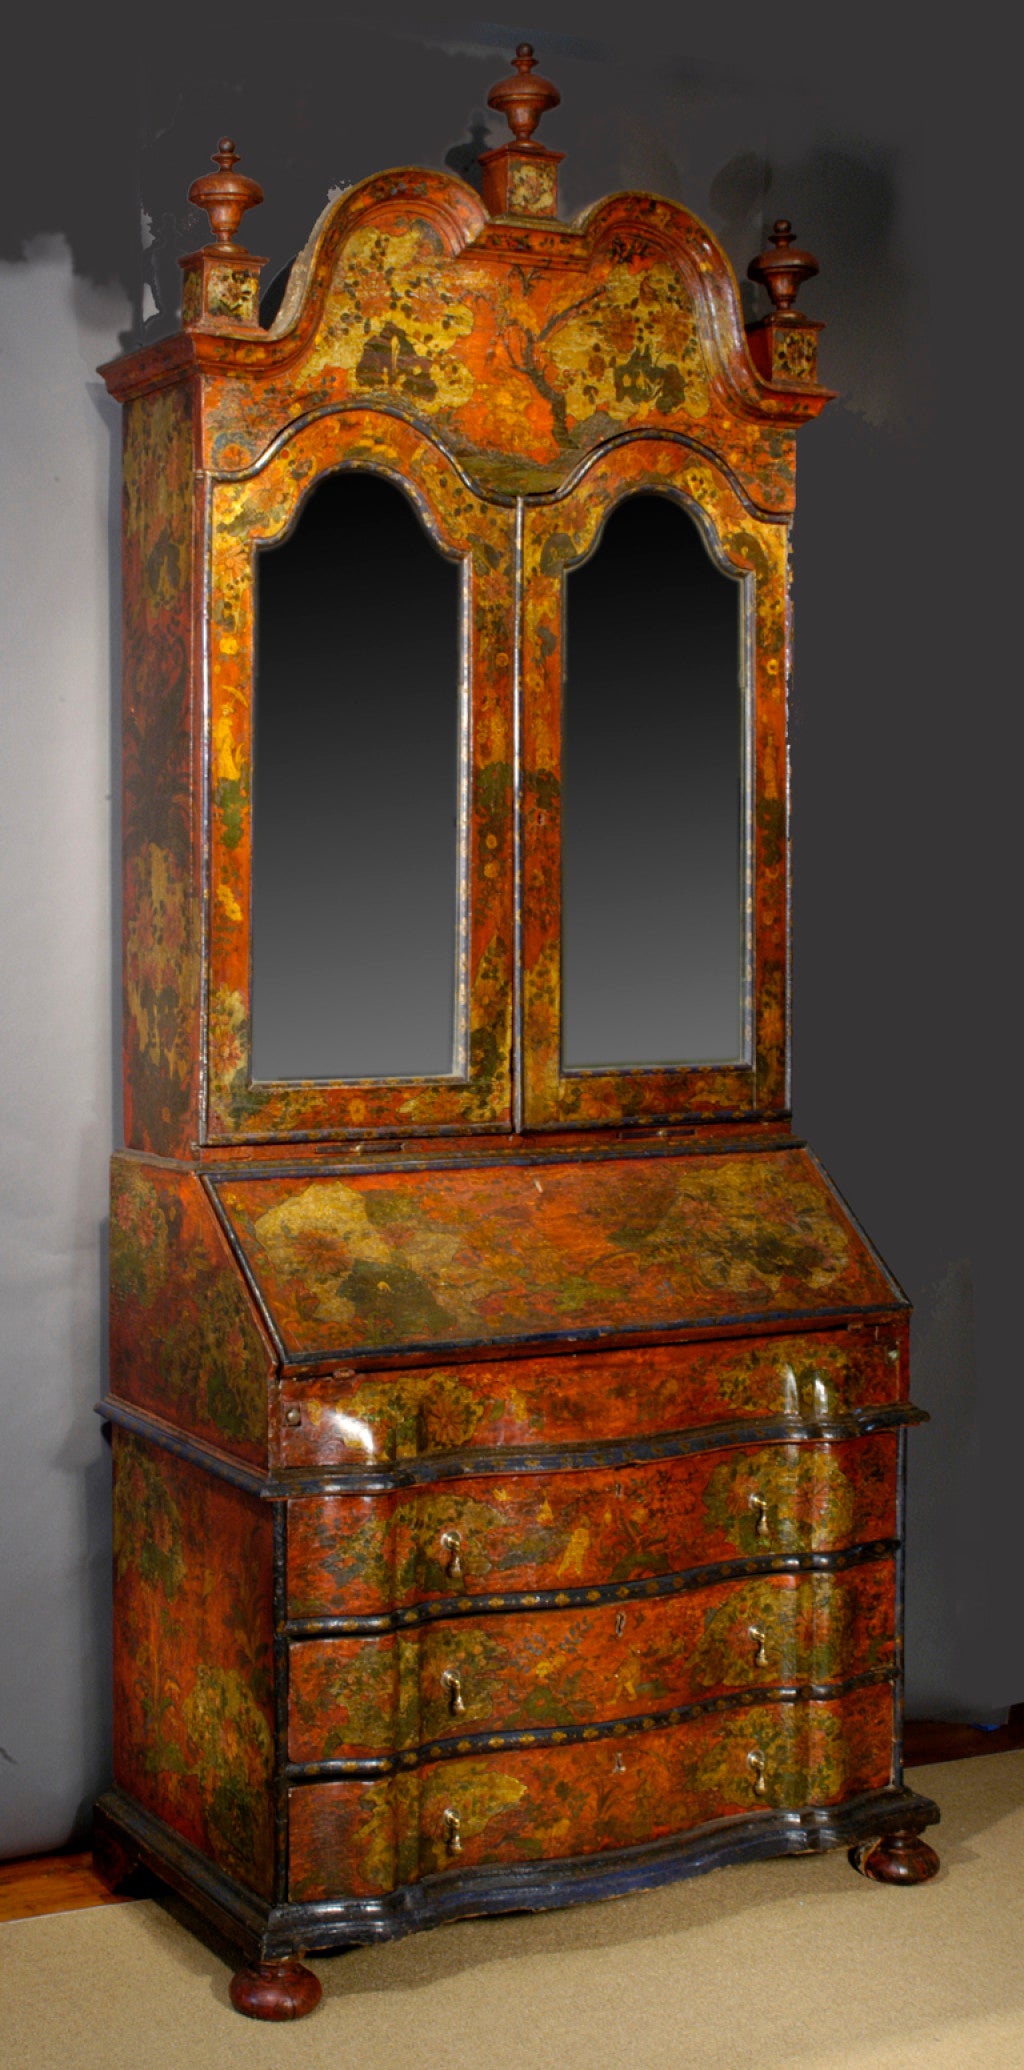 Rare early 18th century red chinoiserie decorated secretary bookcase, having a double arched pediment with three original finials, above a pair of arched mirrored doors enclosing a fitted interior with drawers and folio shelves, the slant front